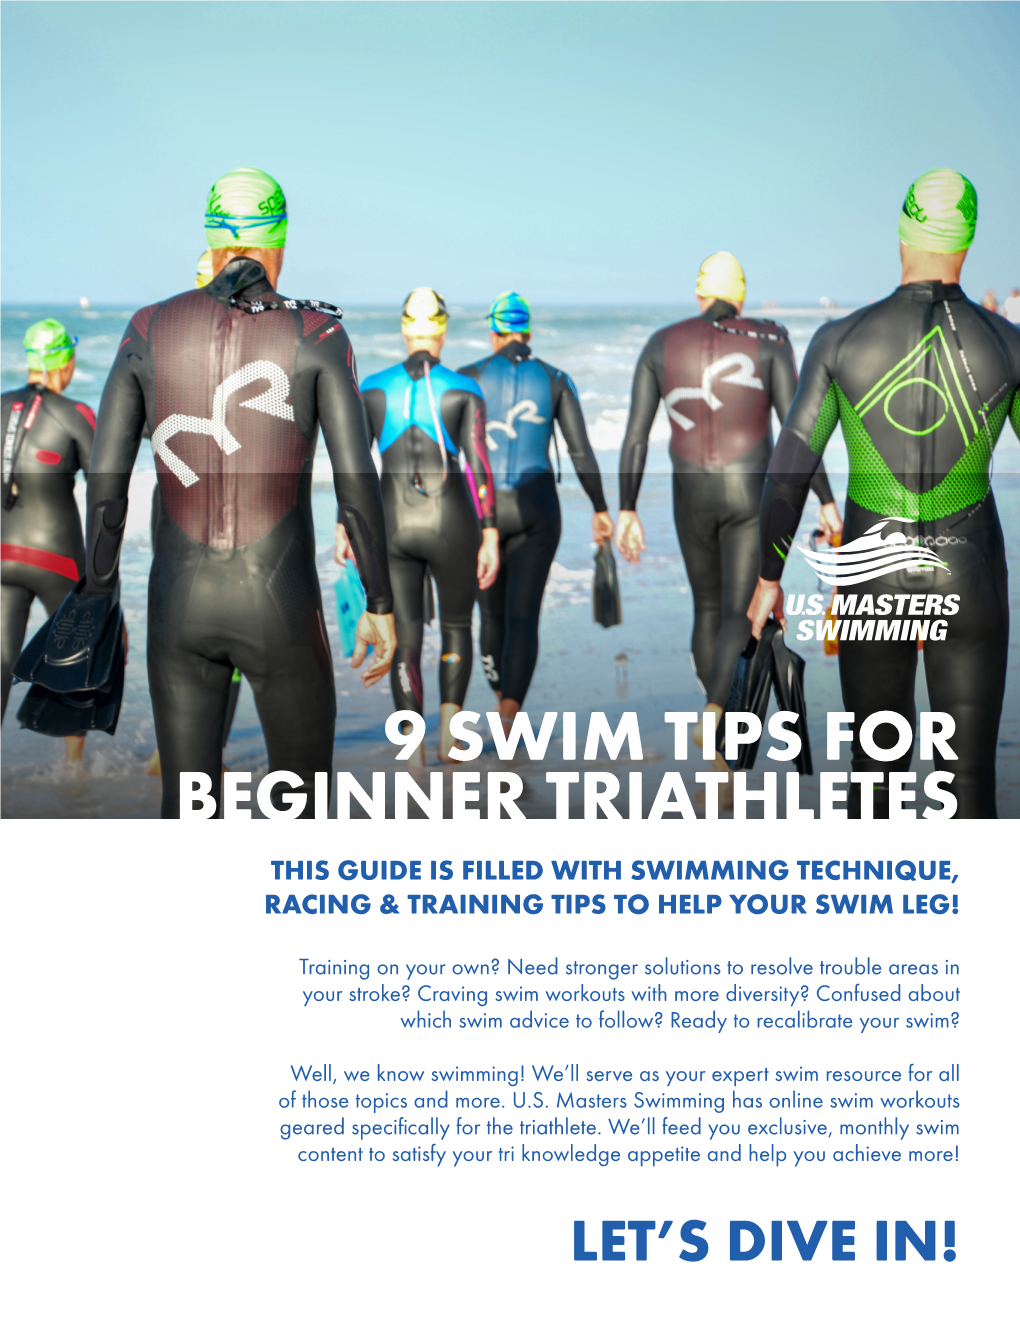 9 Swim Tips for Beginner Triathletes This Guide Is Filled with Swimming Technique, Racing & Training Tips to Help Your Swim Leg!